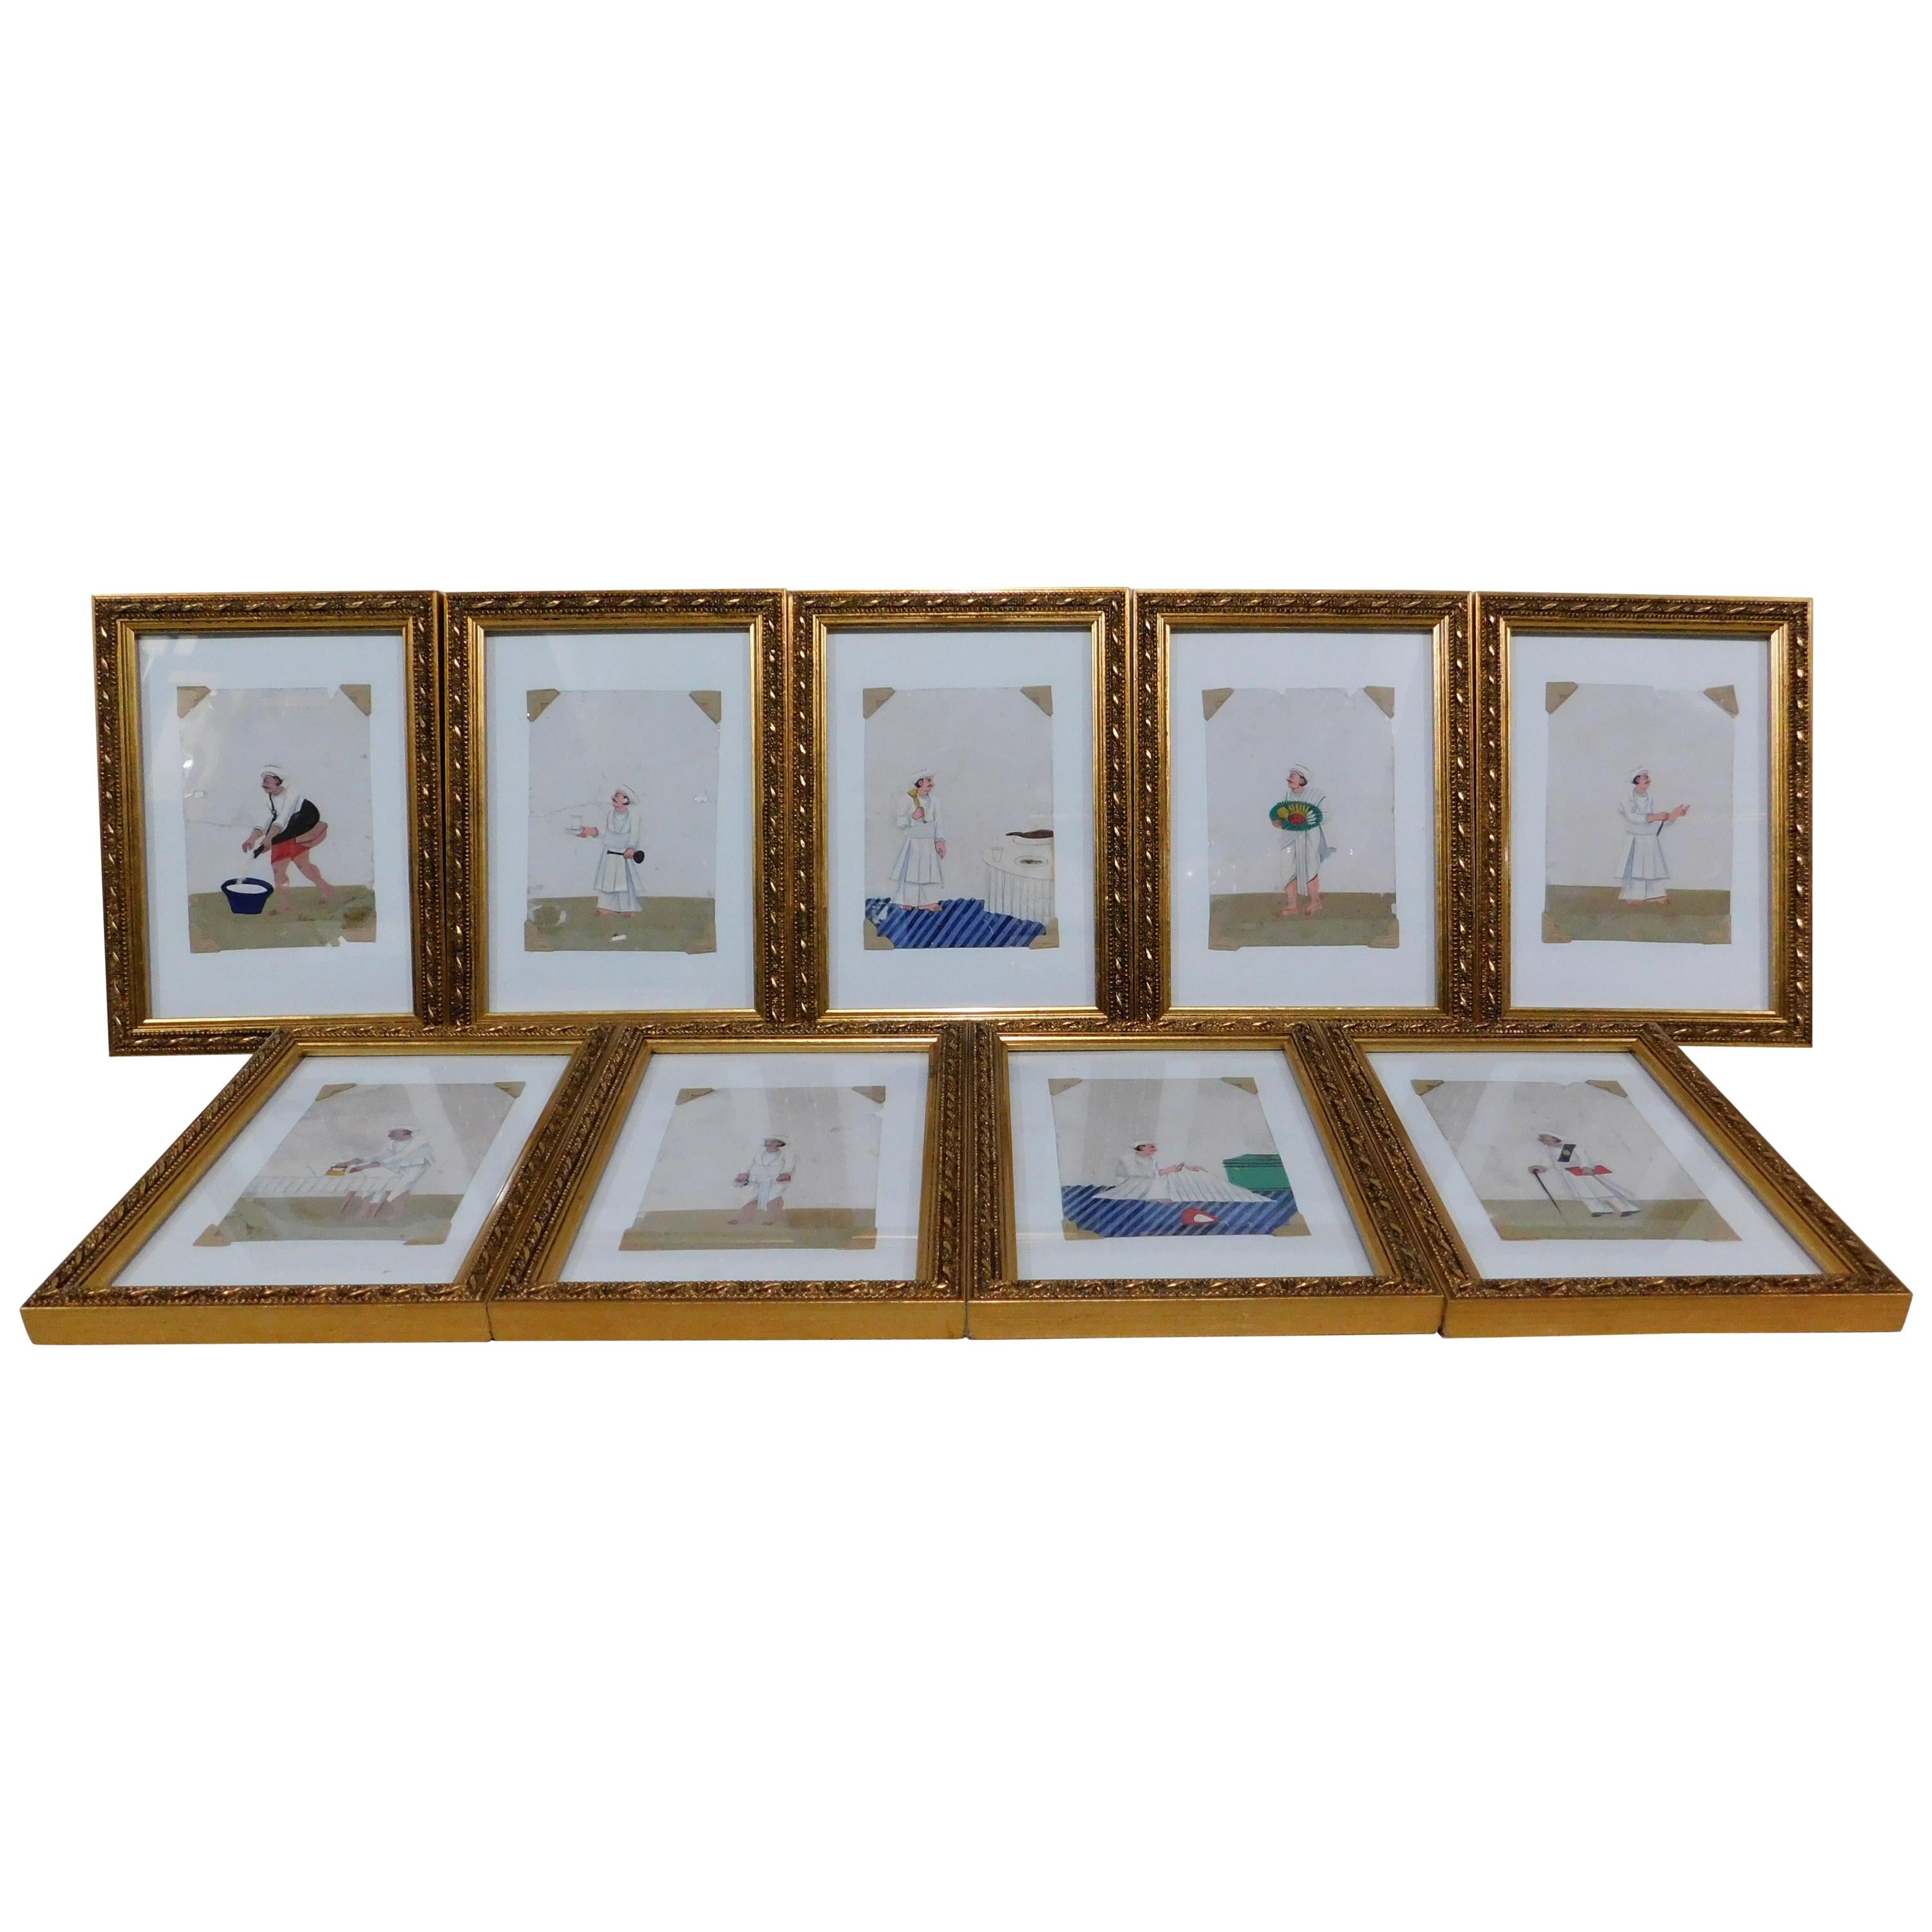 Collection of 9 Asian Miniature Gouache "Company School" Paintings on Mica